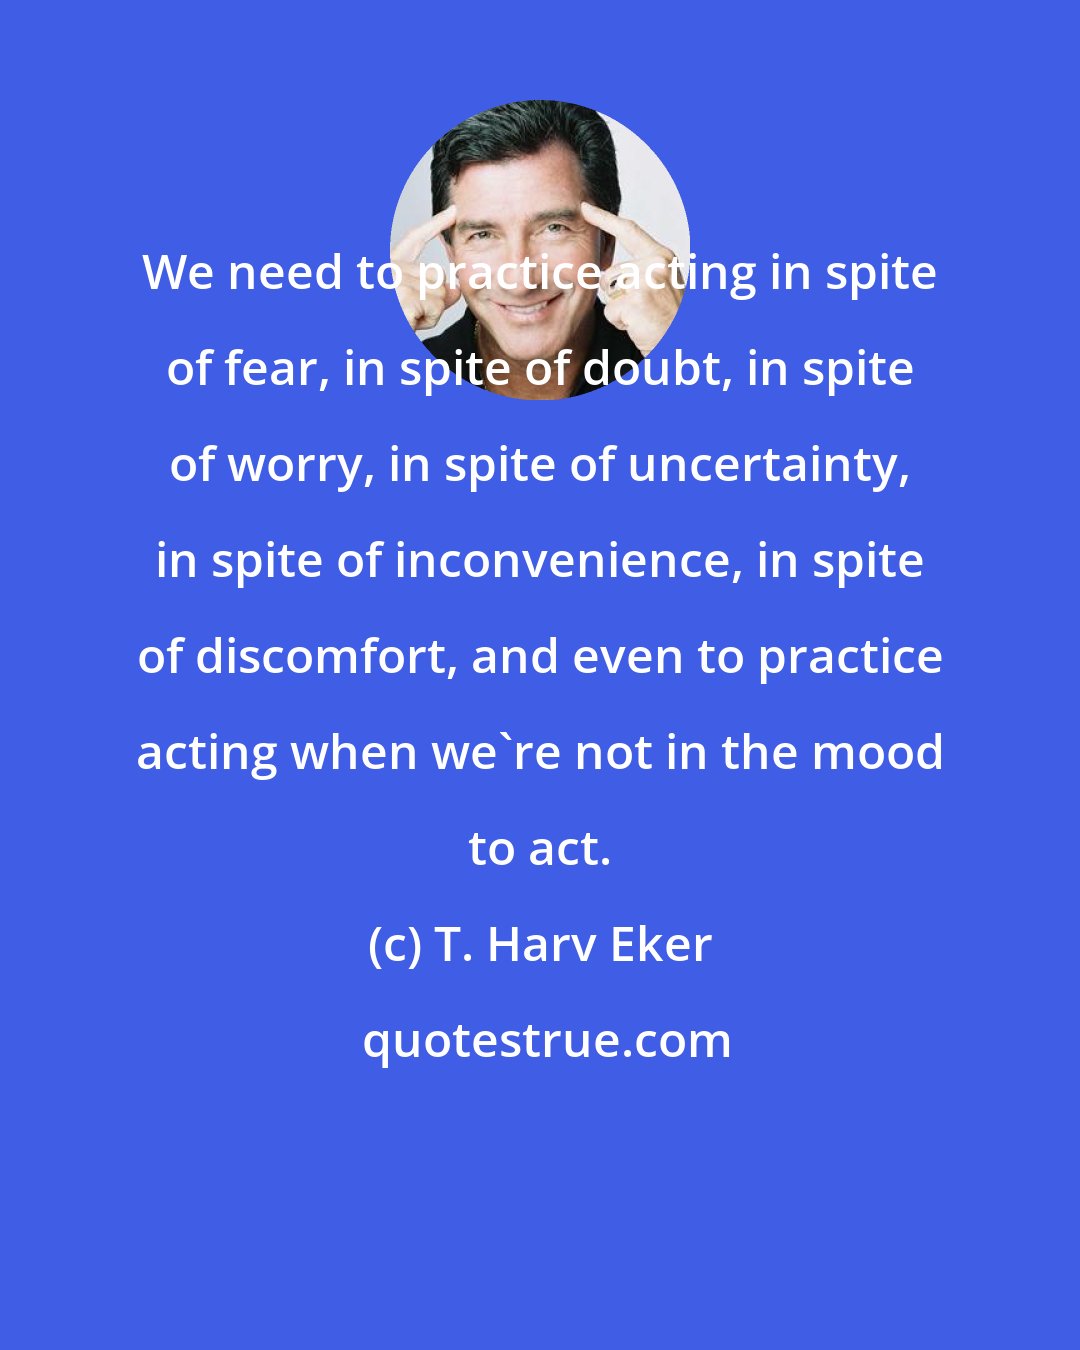 T. Harv Eker: We need to practice acting in spite of fear, in spite of doubt, in spite of worry, in spite of uncertainty, in spite of inconvenience, in spite of discomfort, and even to practice acting when we're not in the mood to act.